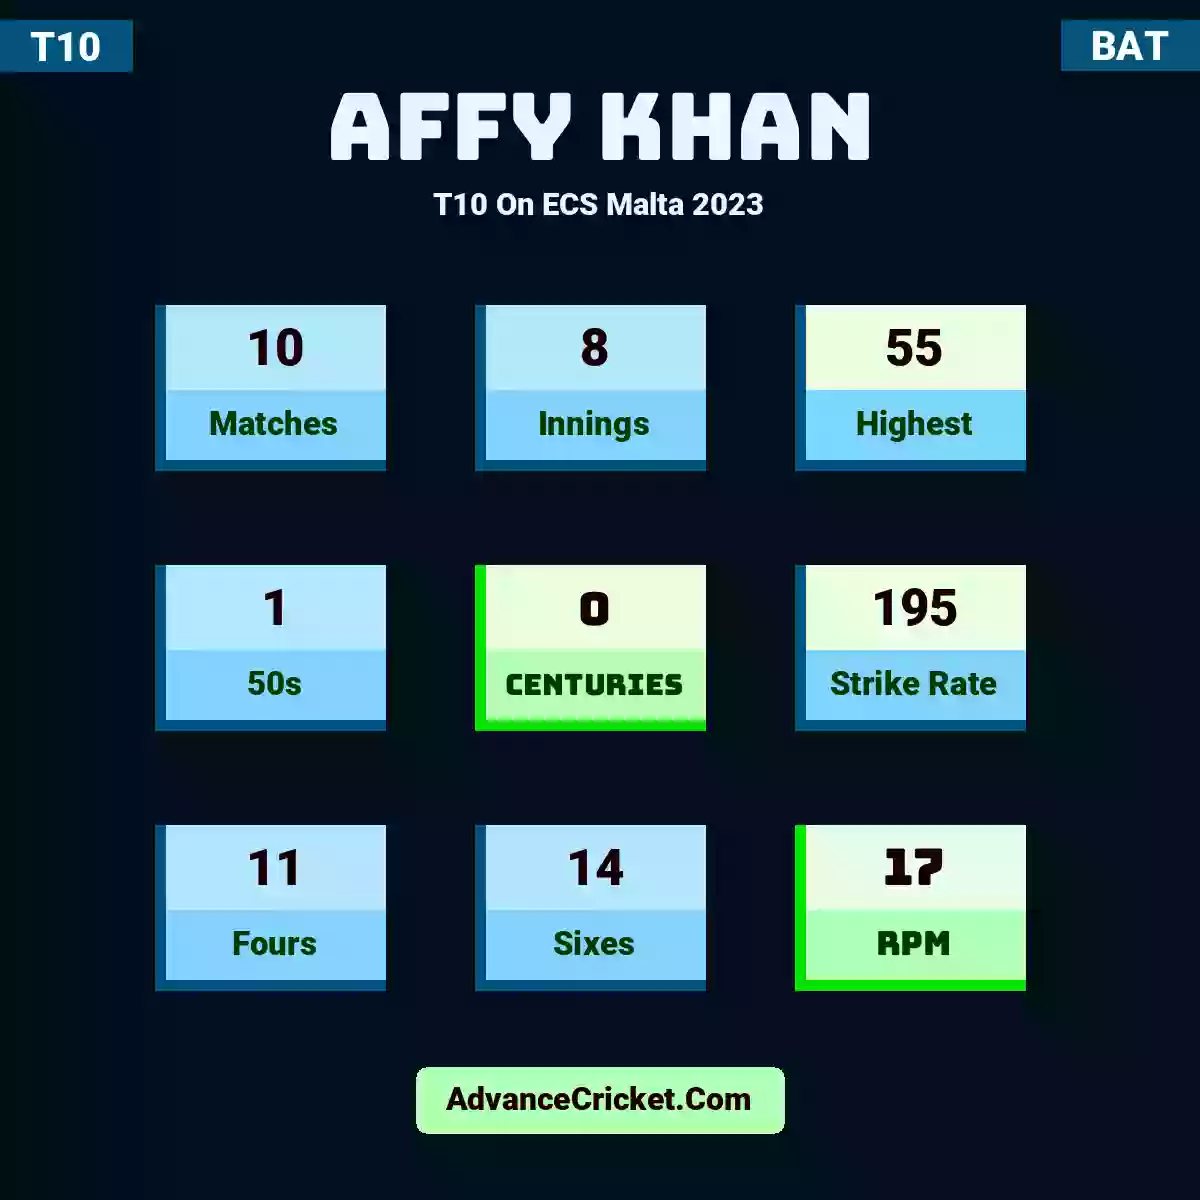 Affy Khan T10  On ECS Malta 2023, Affy Khan played 10 matches, scored 55 runs as highest, 1 half-centuries, and 0 centuries, with a strike rate of 195. A.Khan hit 11 fours and 14 sixes, with an RPM of 17.